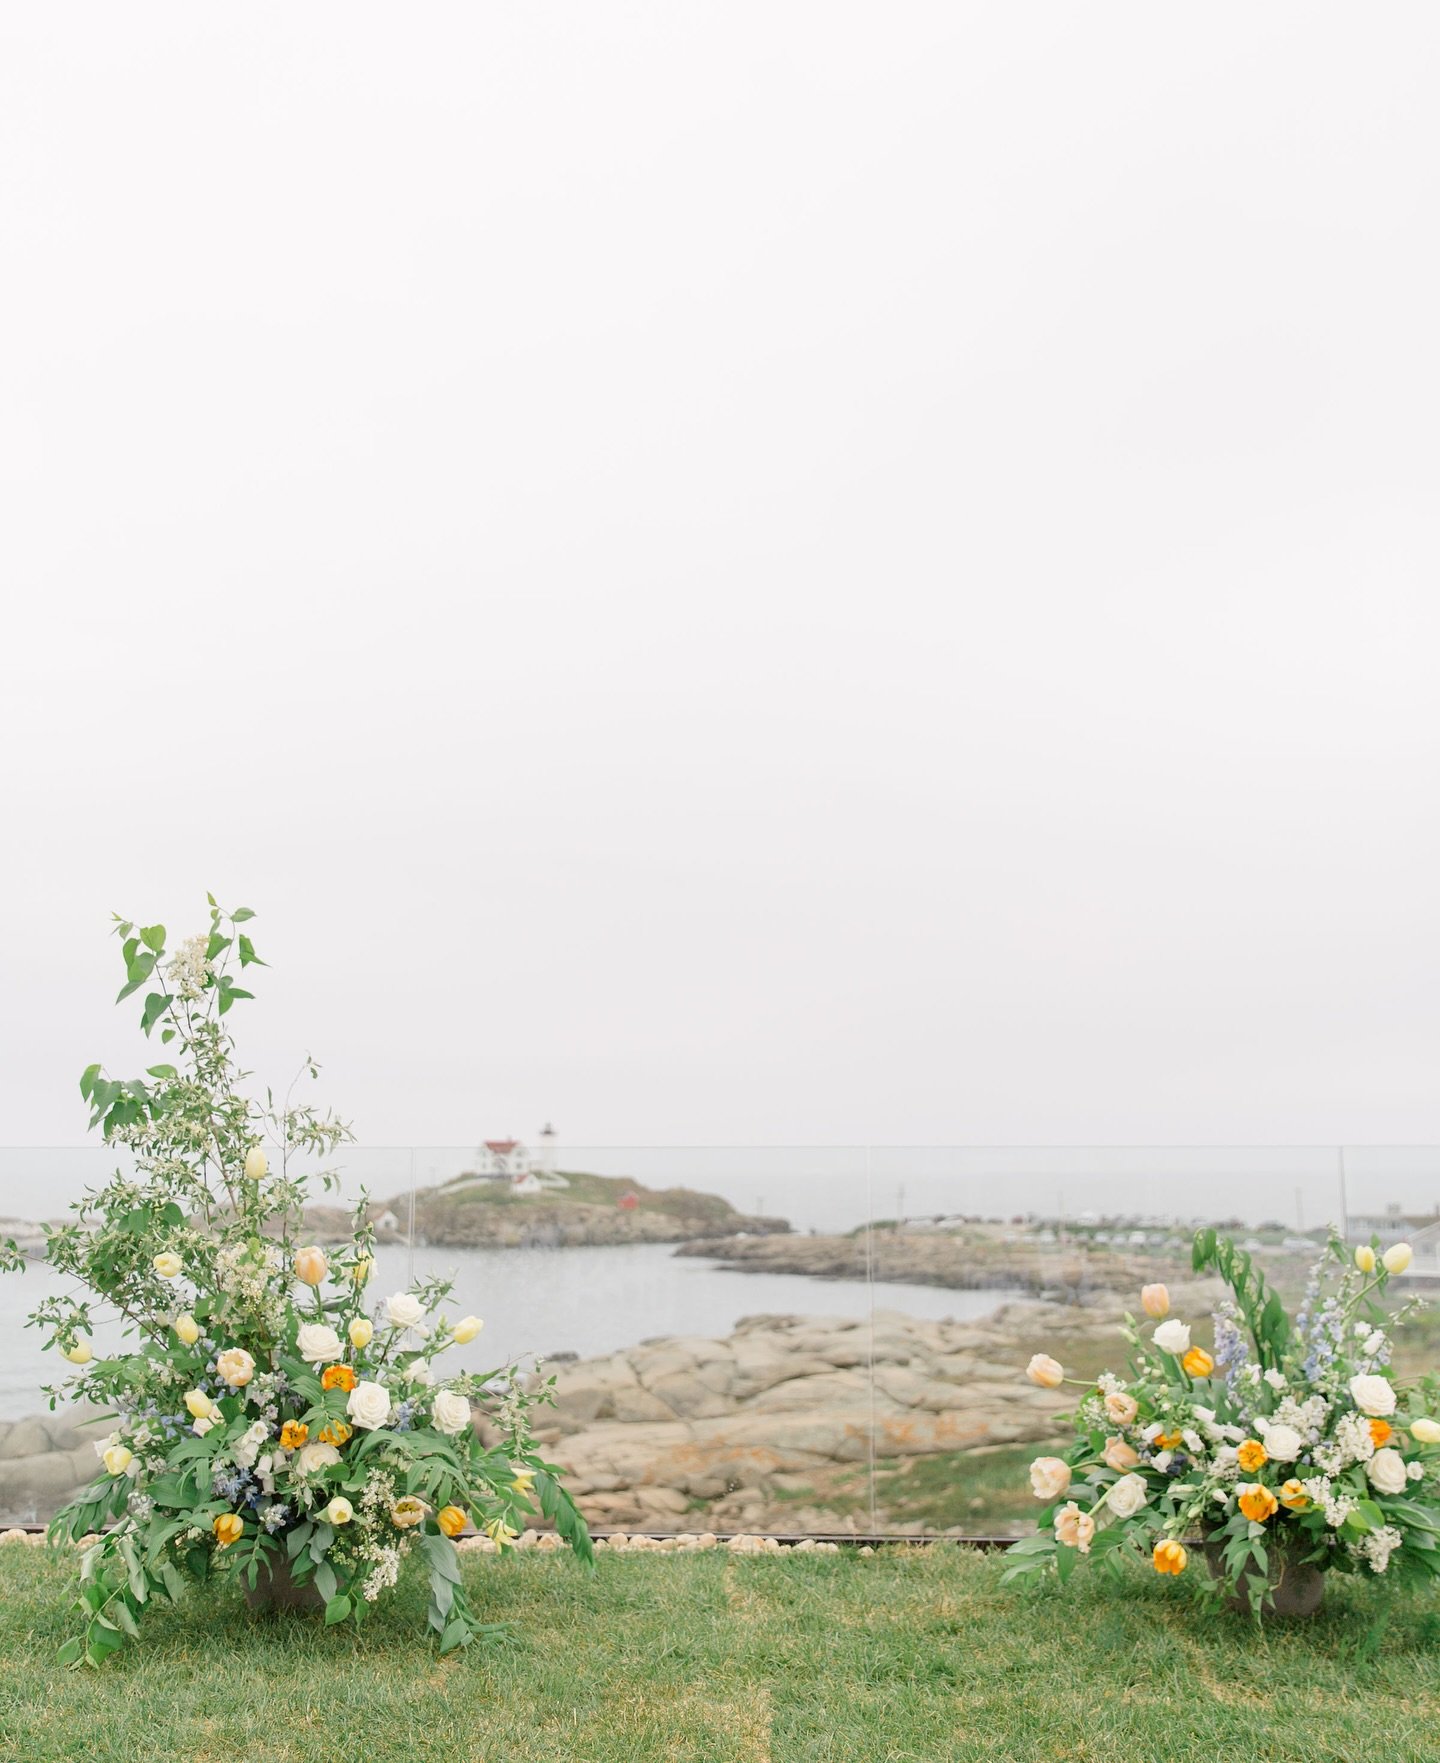 For the second year in a row, we will kick off our season @viewpoint.events 🌊. We cannot wait for you to see the details and design that we drummed up with our fantastic couple!

Photo + Video // @thelibbysphotoandfilms
Venue // @viewpointyorkmaine
